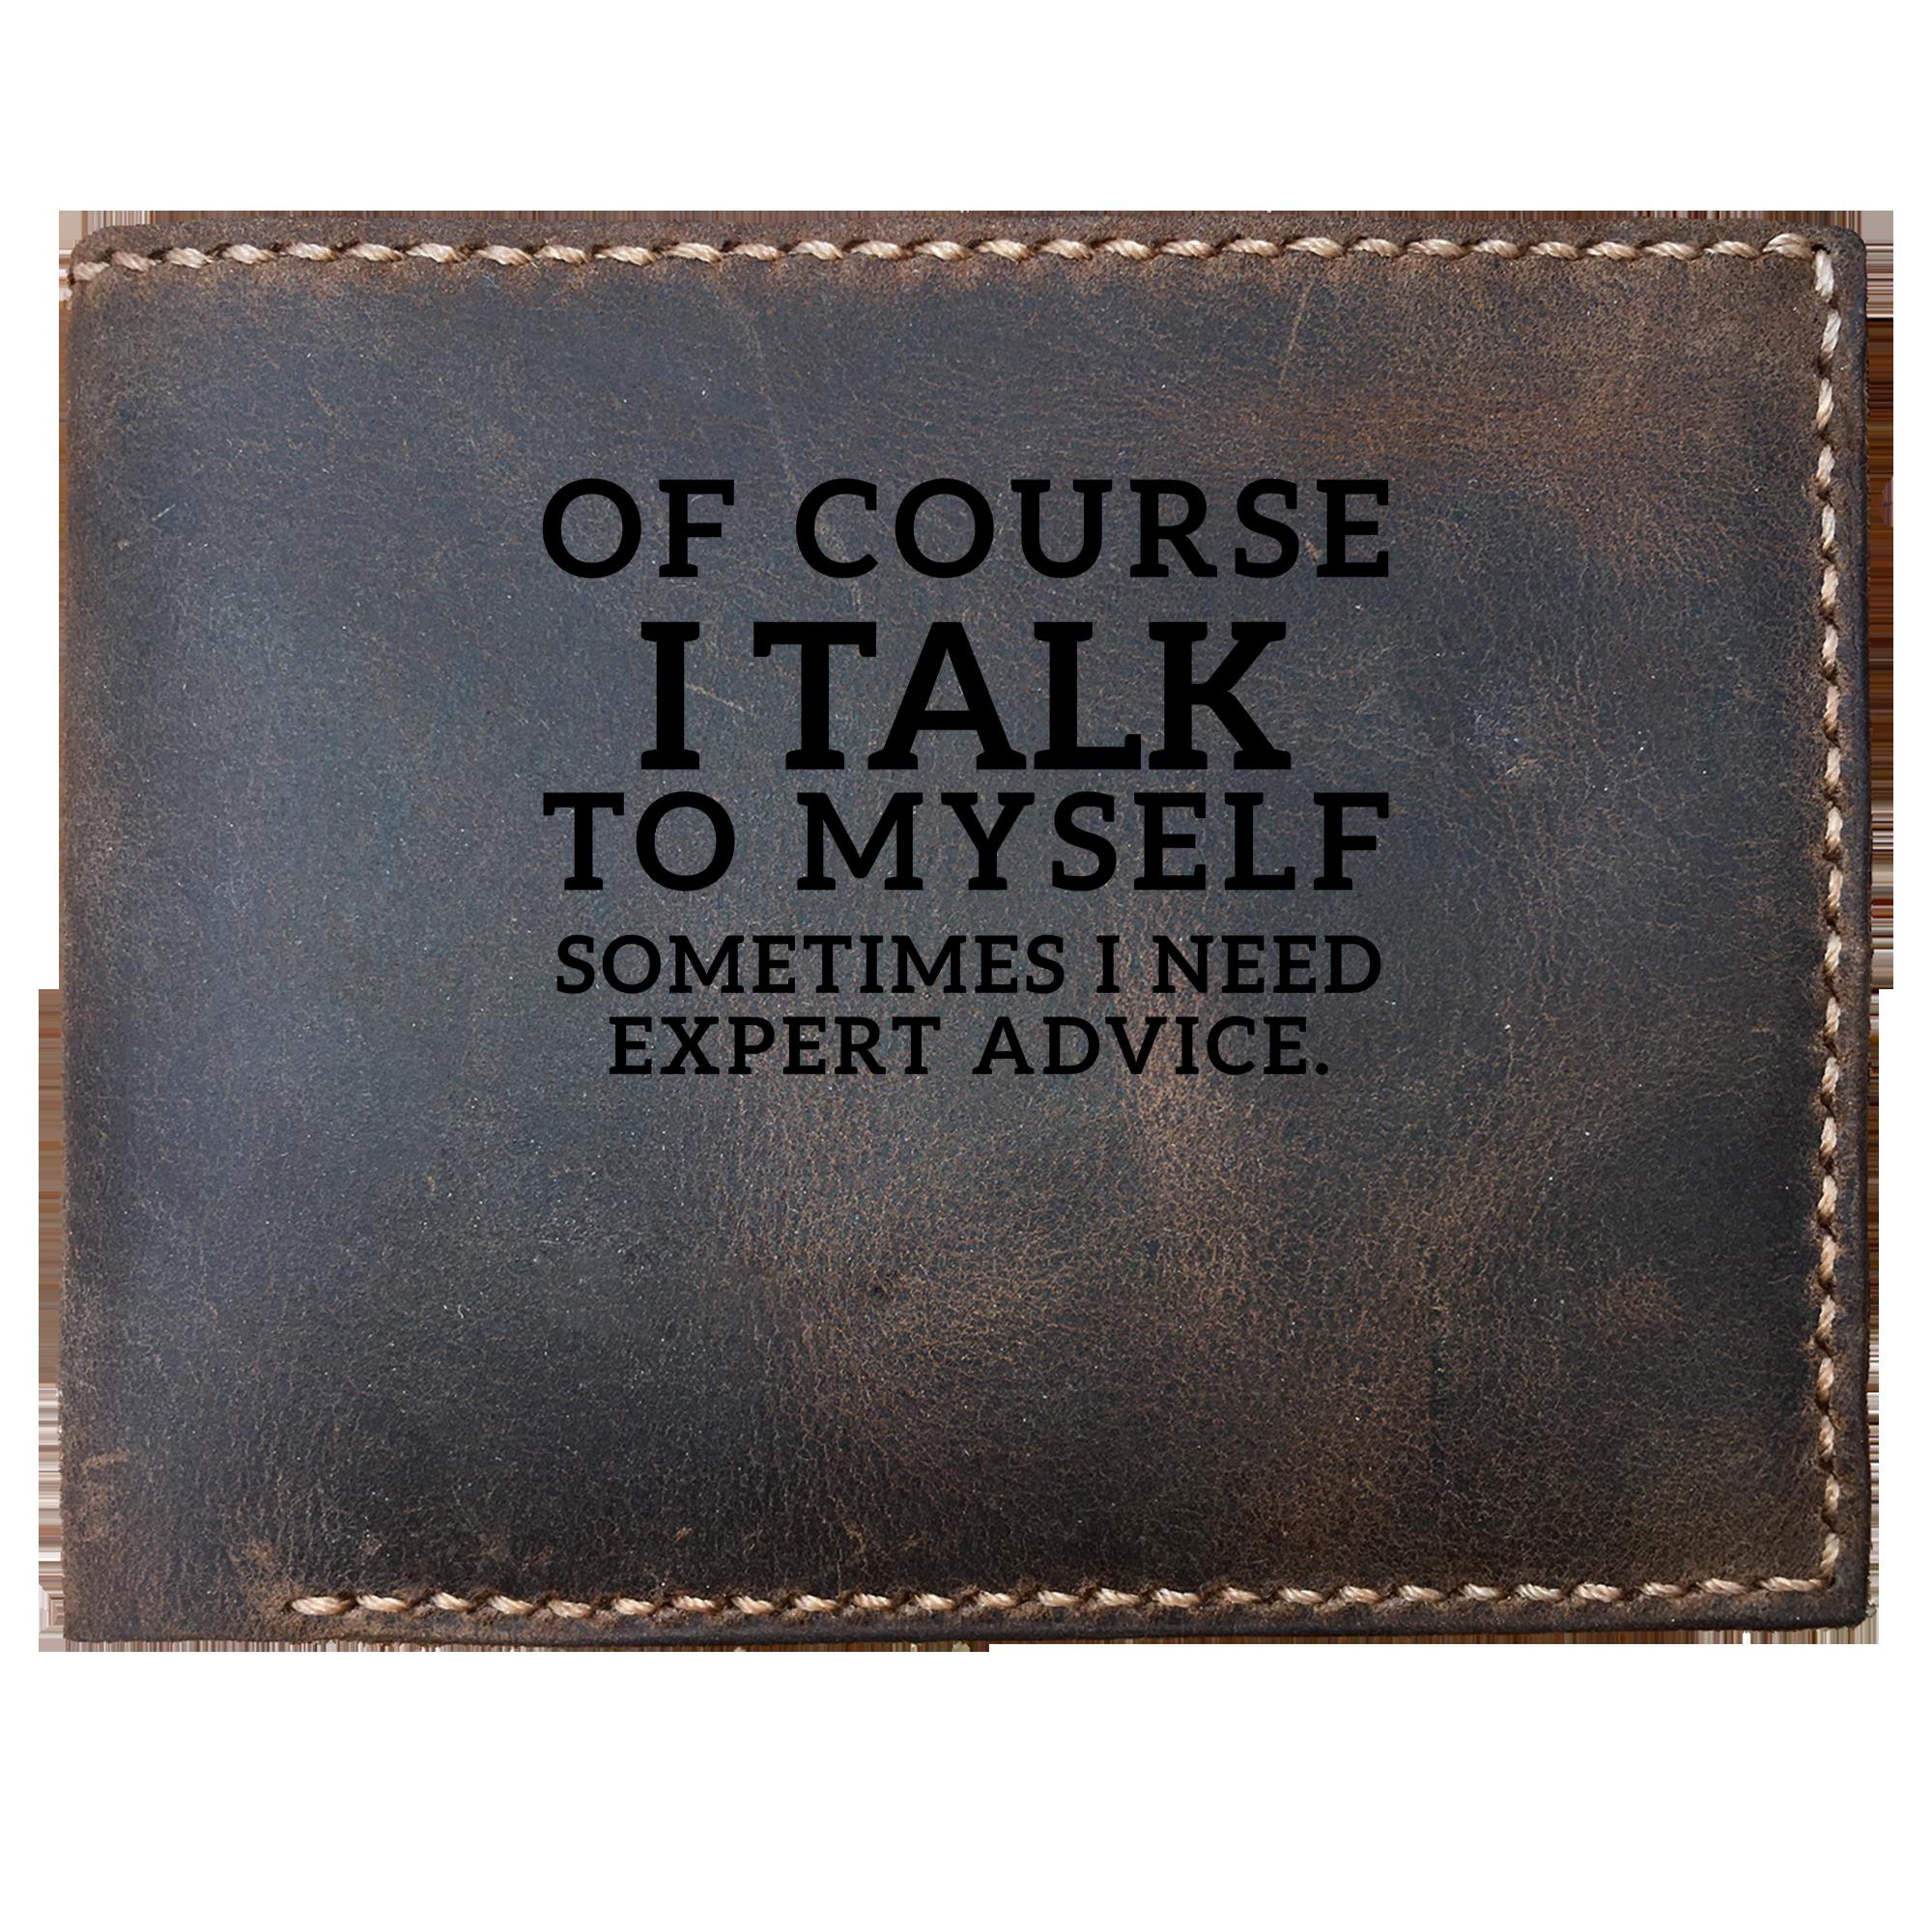 Skitongifts Funny Custom Laser Engraved Bifold Leather Wallet For Men, Of Course I Talk To Mysef Sometimes I Need Expert Advice